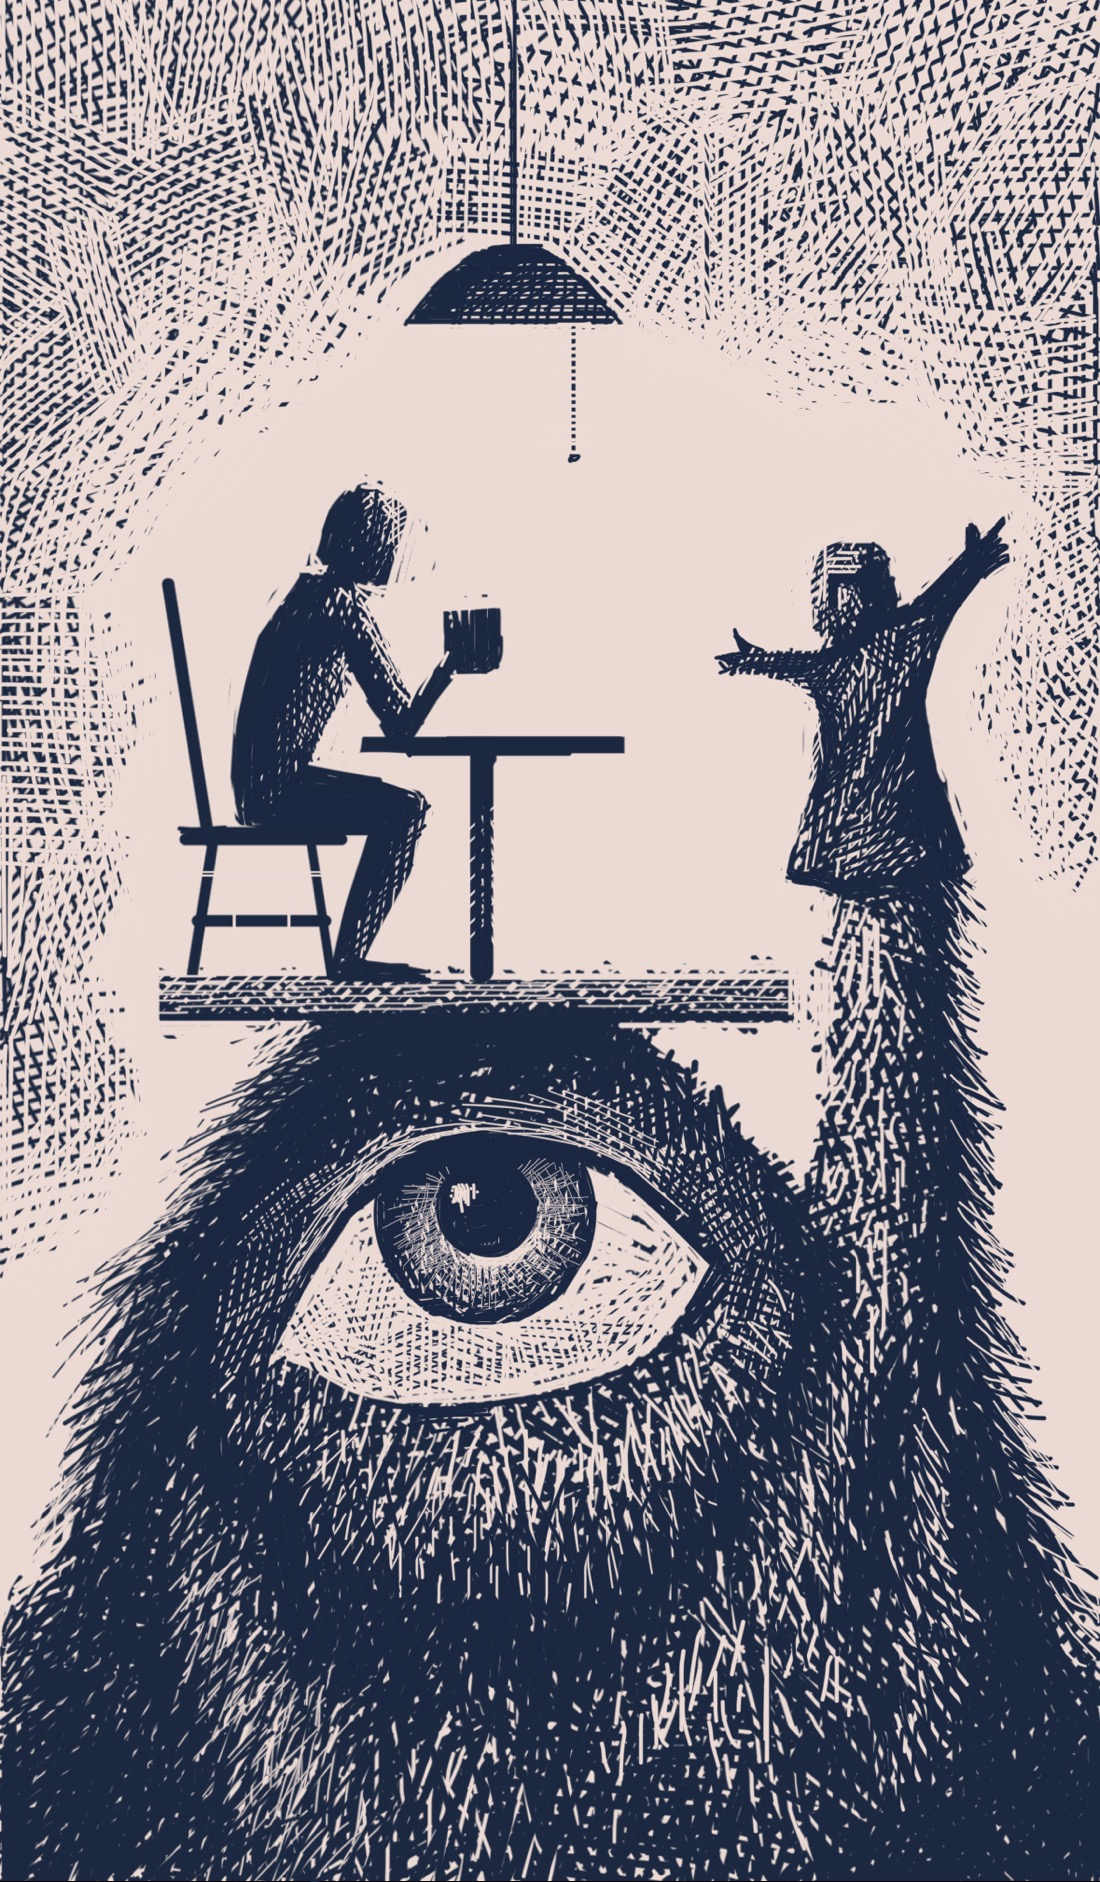 A giant furry creature with one eye. On top of the creature's head is balanced a platform, on which sits a cafe table and chair. A person sits at the table, holding a mug. Across the table from the person is a puppet, which the furry creature is holding up from below. Above the person hangs a light. There are shadows, suggesting a somewhat darkened room.